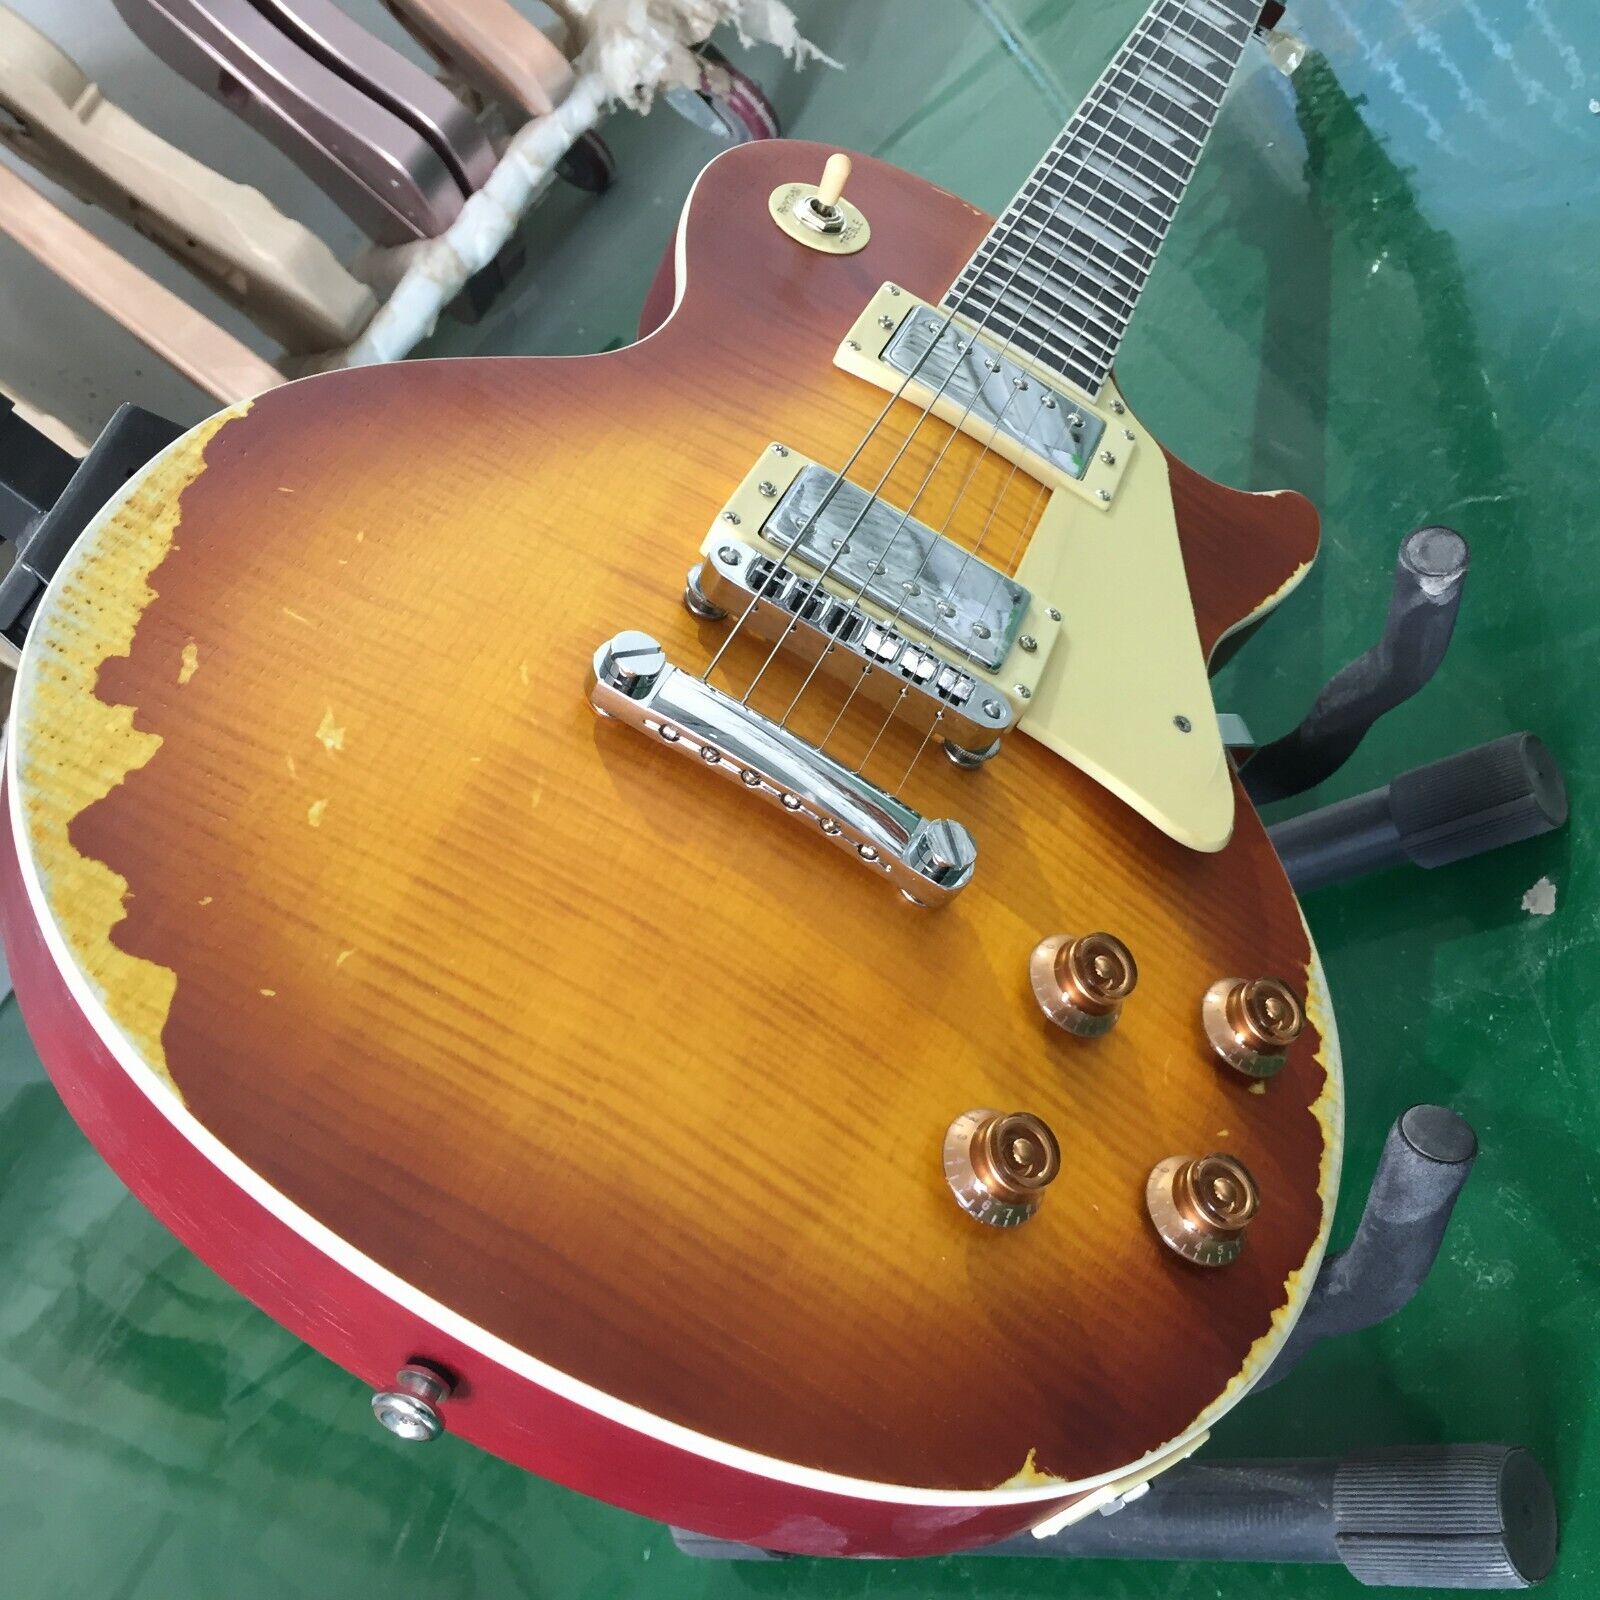 Limited Edition Custom Shop '59 Lp Electric Guitar Heavily Aged Slow Iced Tea